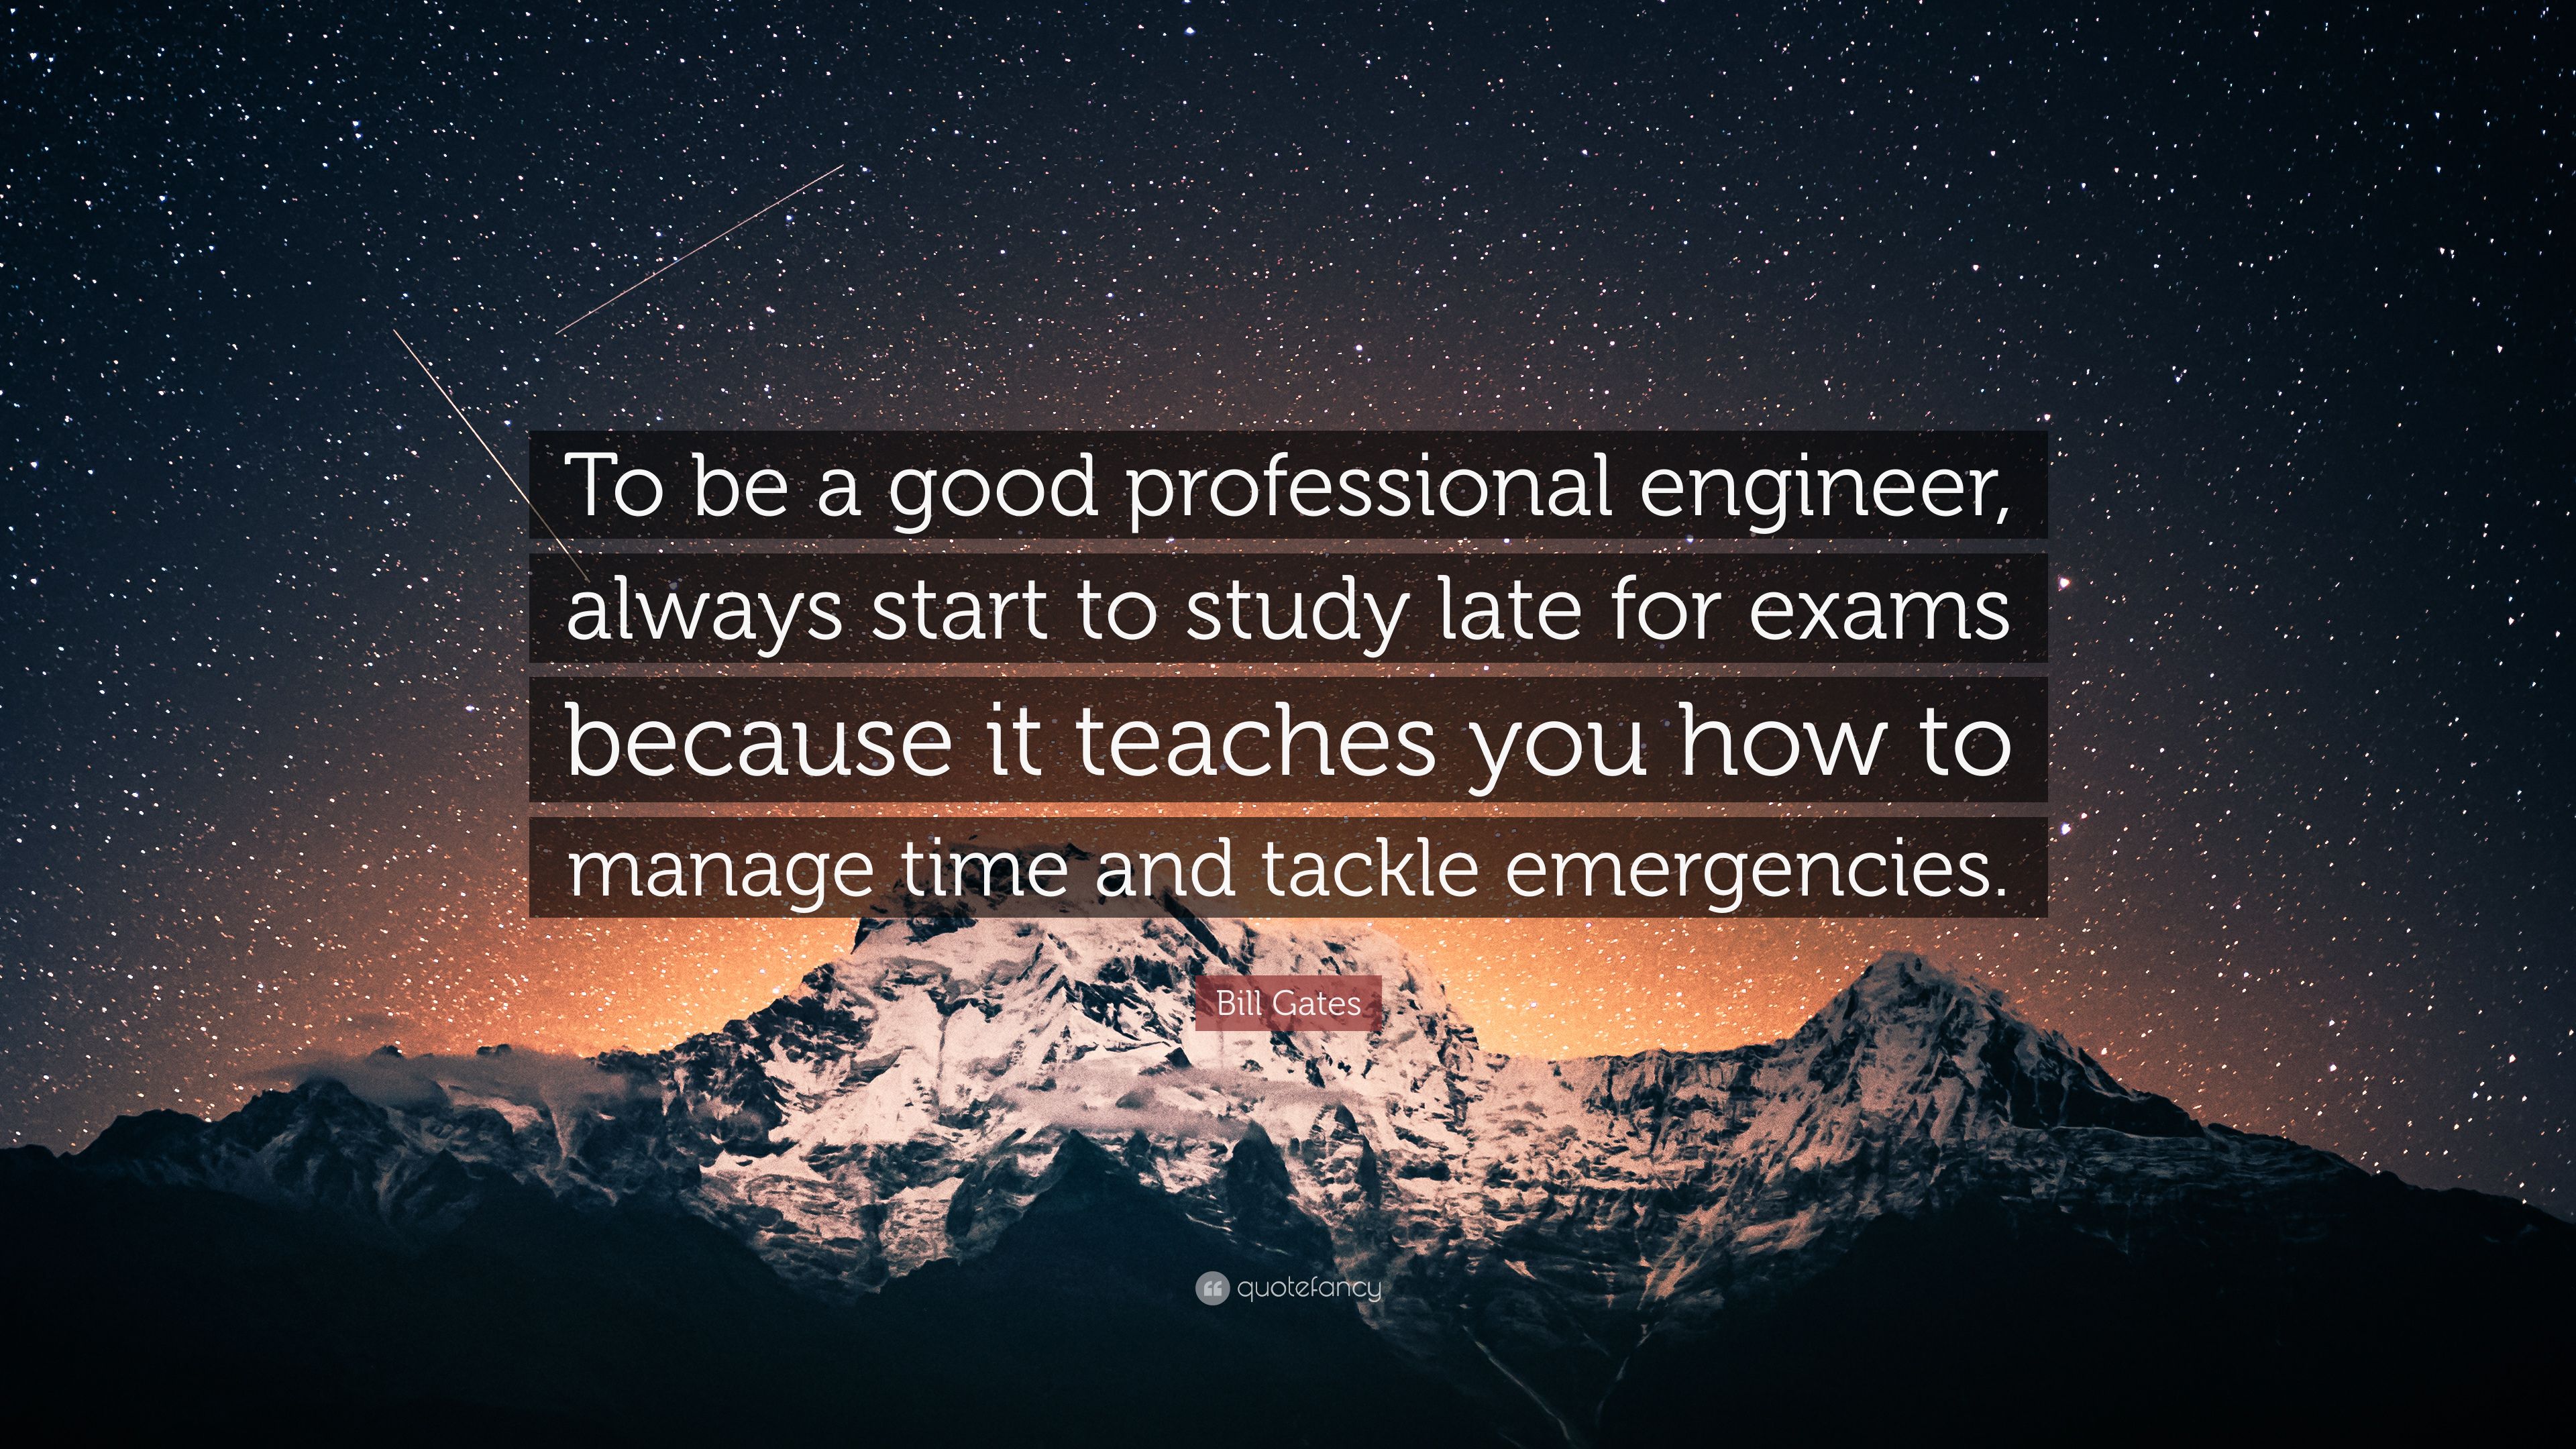 Bill Gates Quote: “To be a good professional engineer, always start to study late for exams because it teaches you how to manage time and t.” (12 wallpaper)